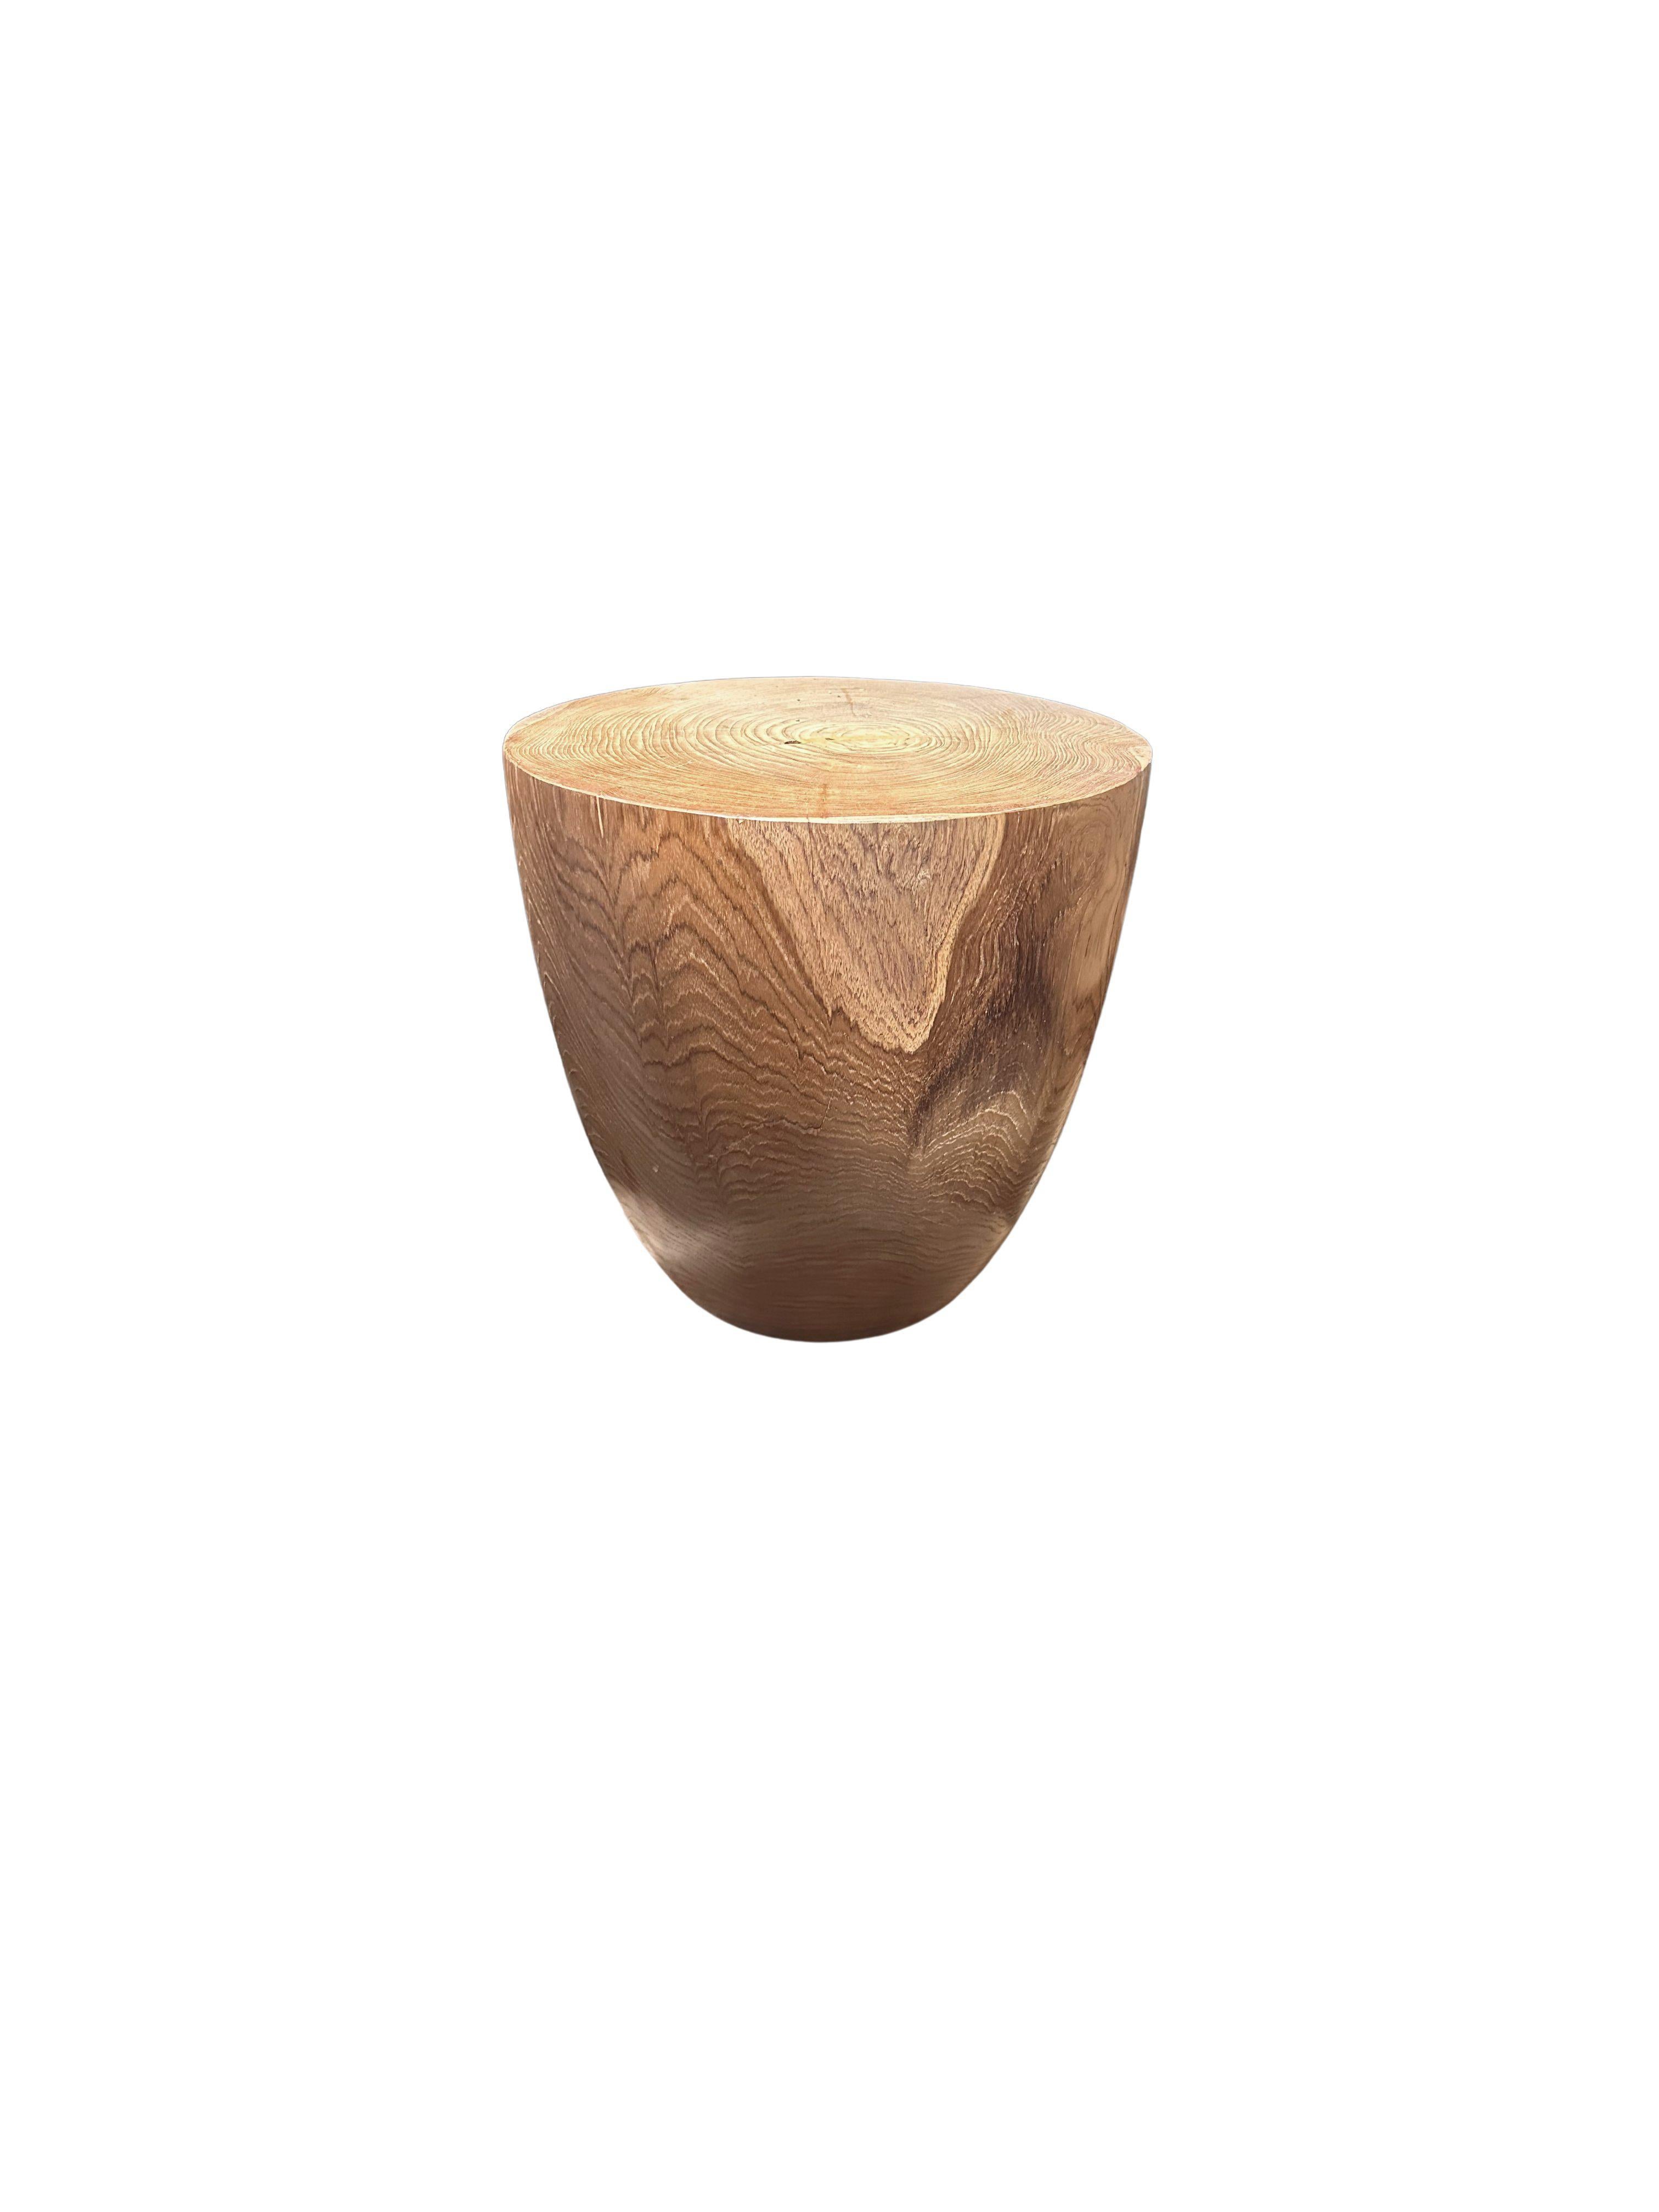 Indonesian Sculptural Teak Wood Side Table, with Stunning Wood Textures, Modern Organic For Sale